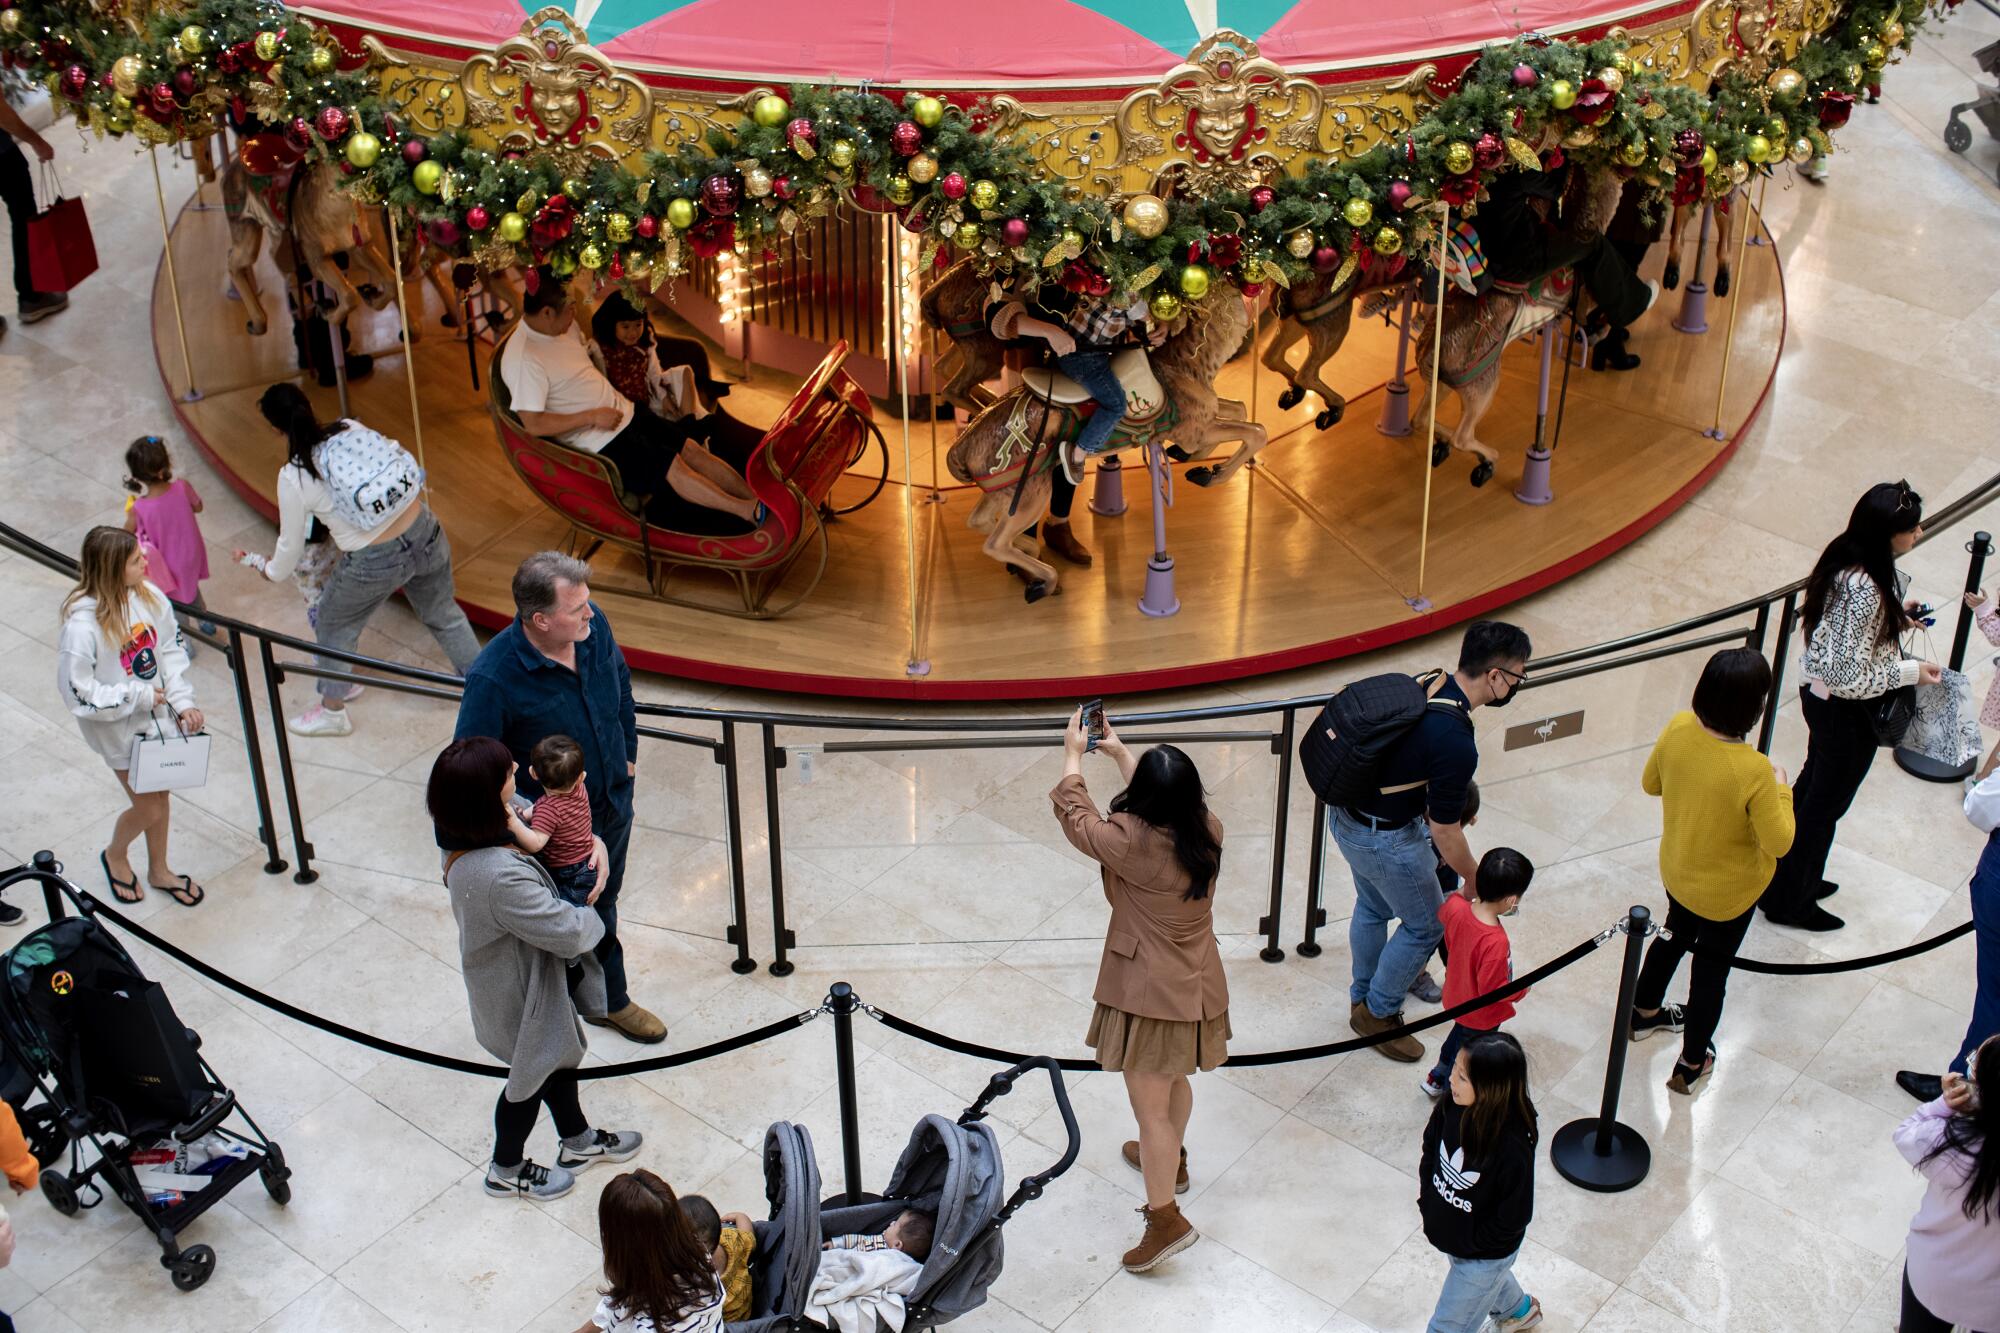 Patrons wait in line for a ride on the carousel on Black Friday at South Coast Plaza in Costa Mesa.